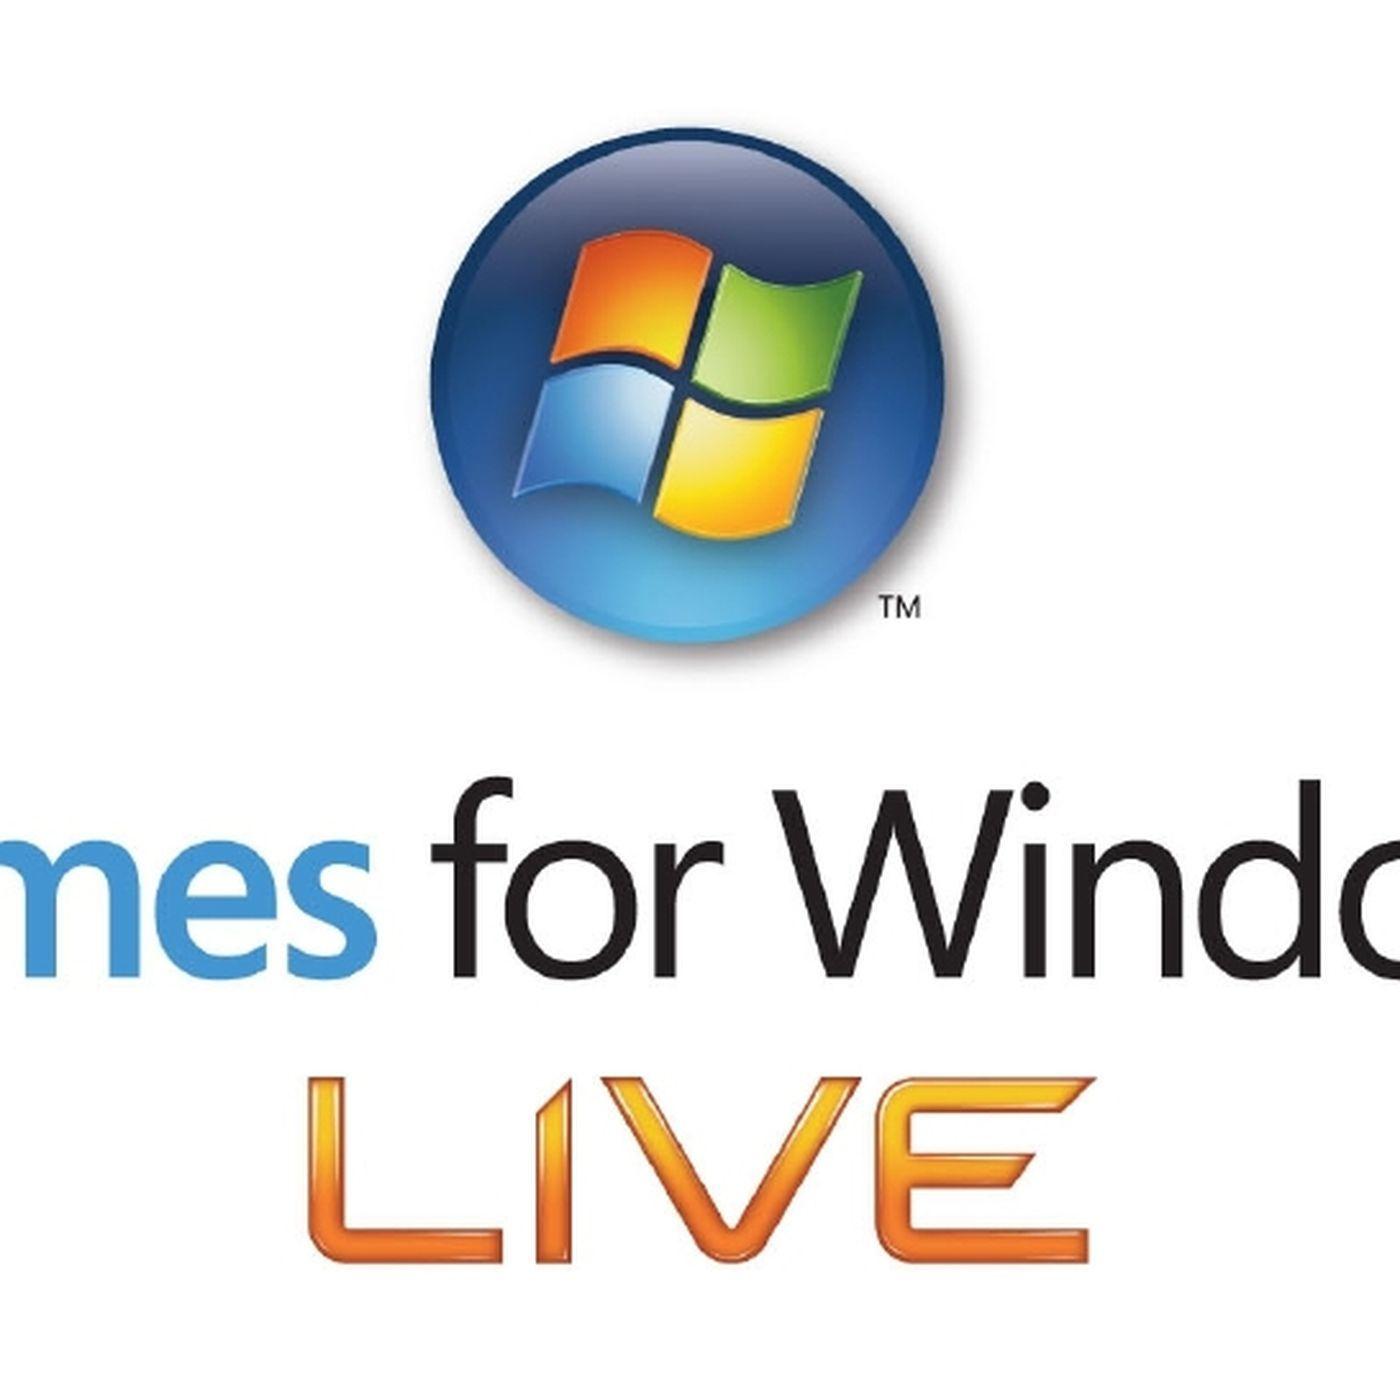 Games for Windows Live Logo - Microsoft says it isn't shutting down Games for Windows Live - Polygon